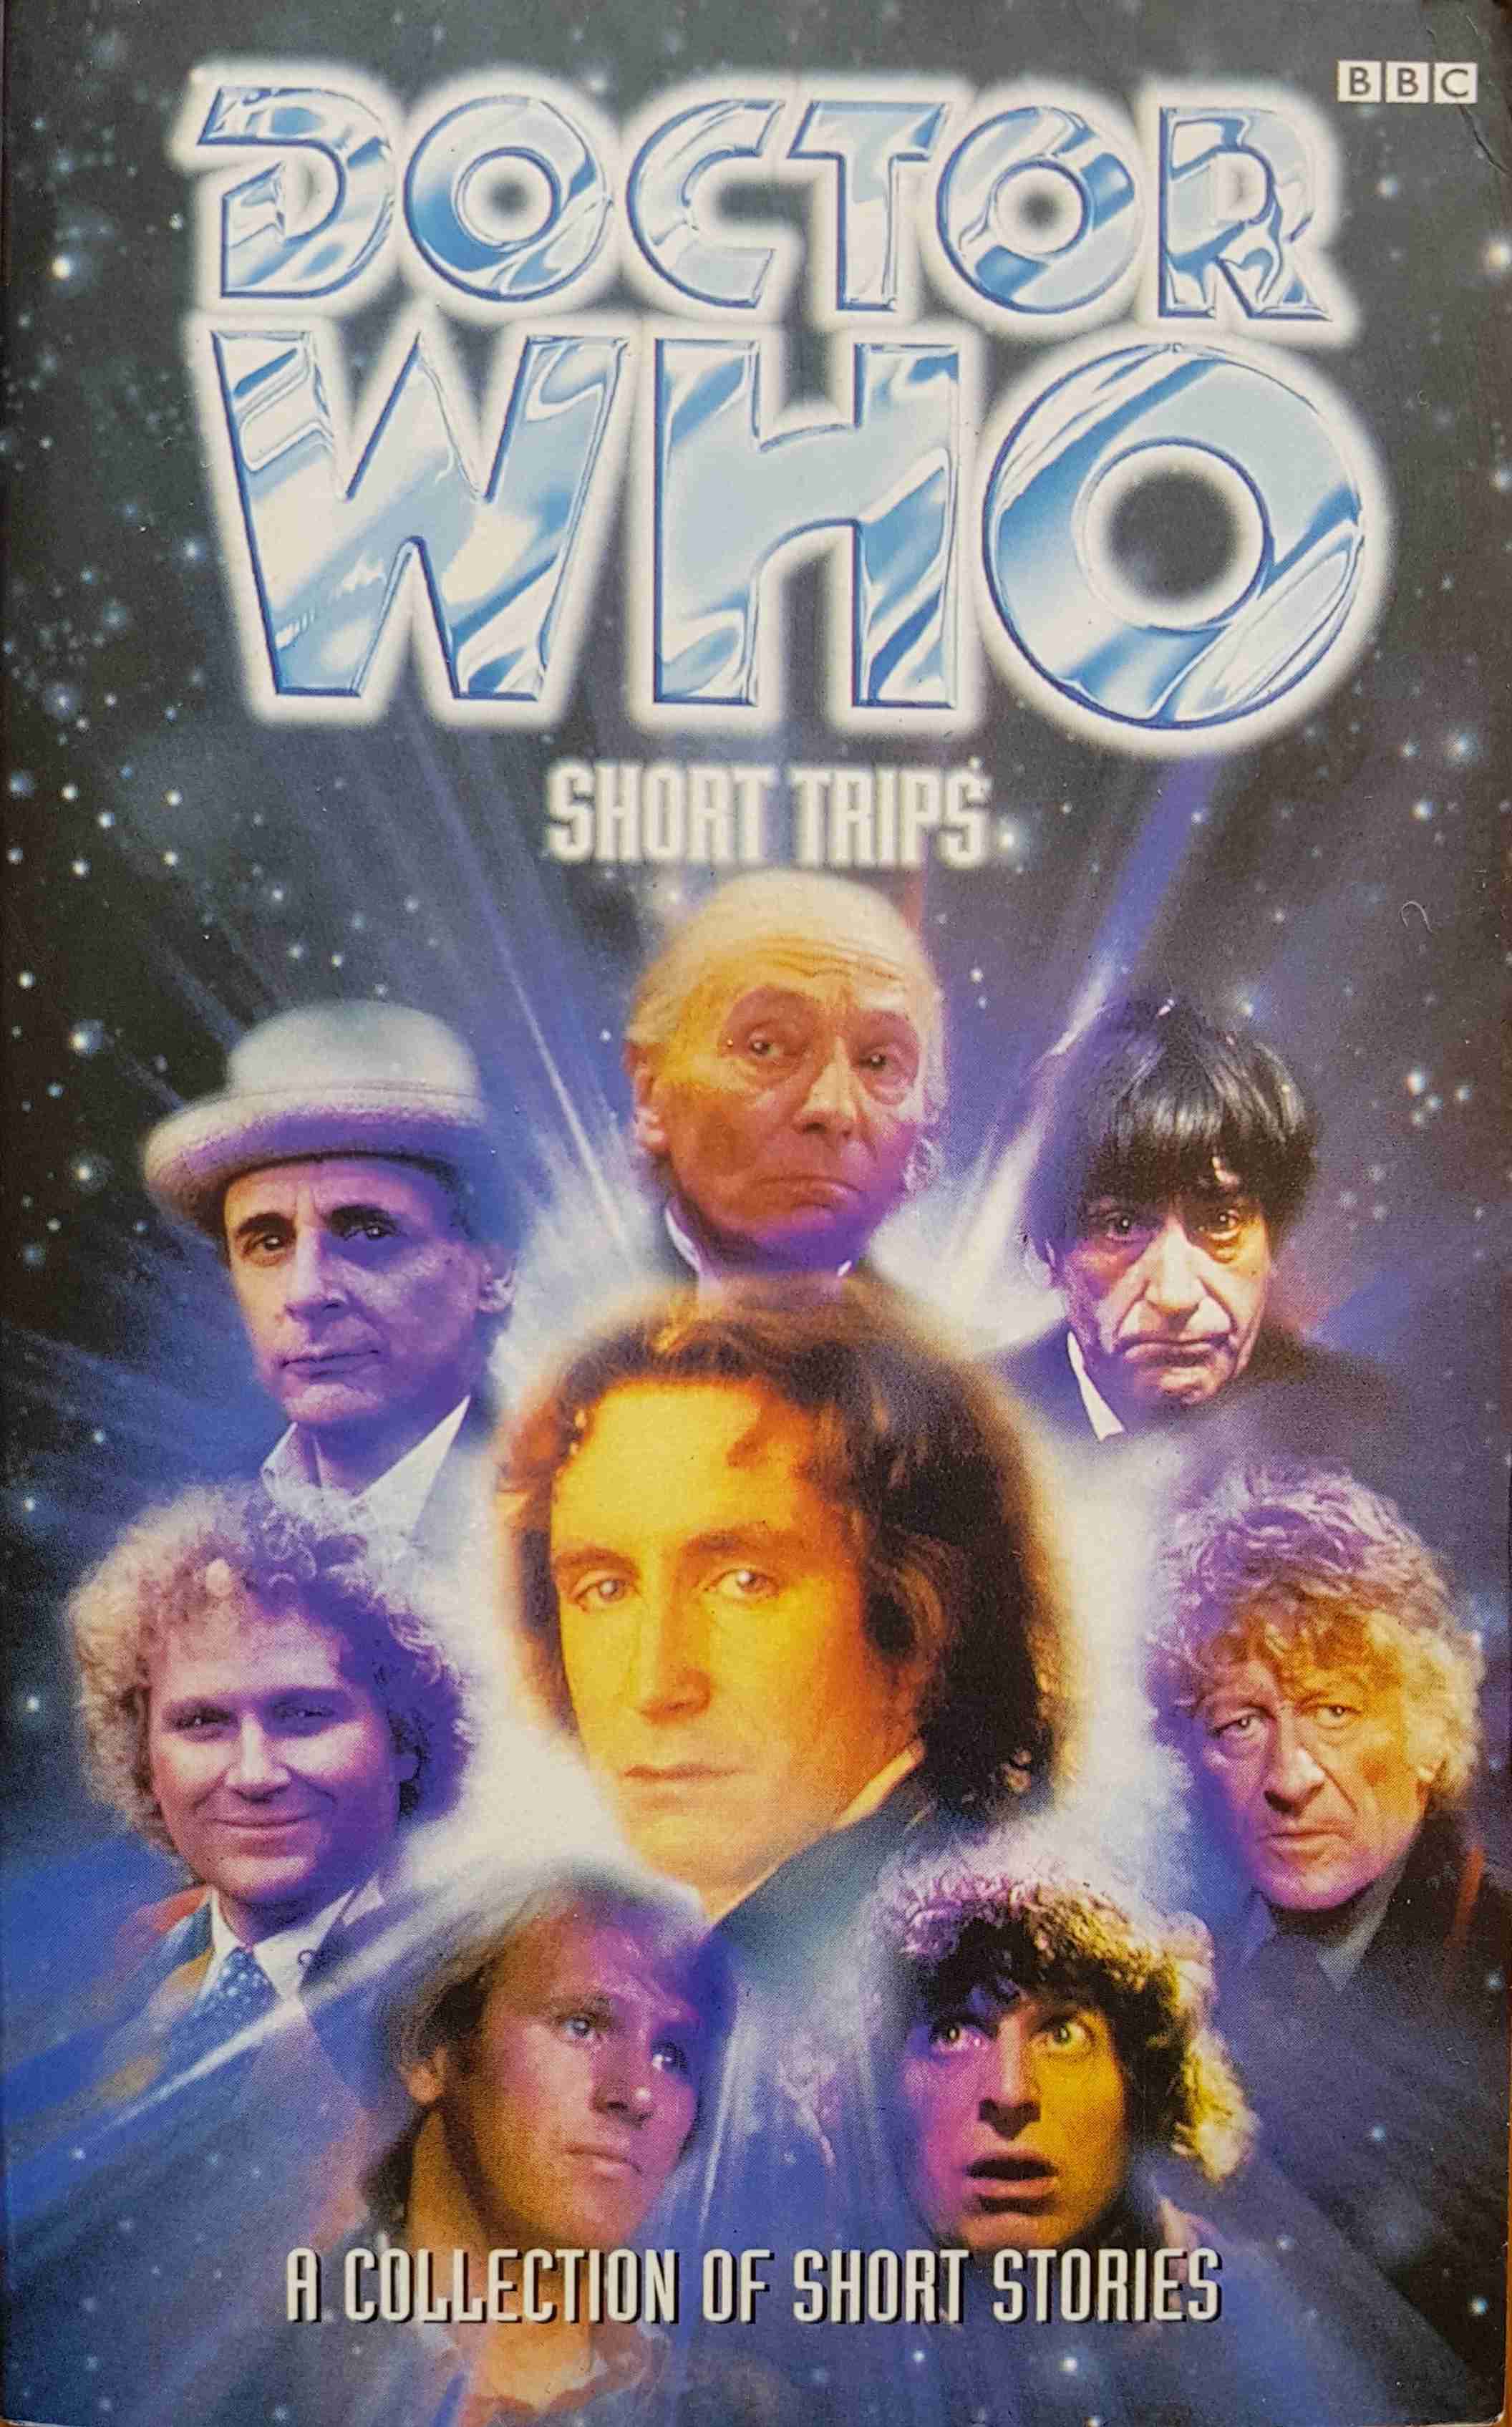 Picture of 0-563-40560-0 Doctor Who - Short trips by artist Various from the BBC books - Records and Tapes library